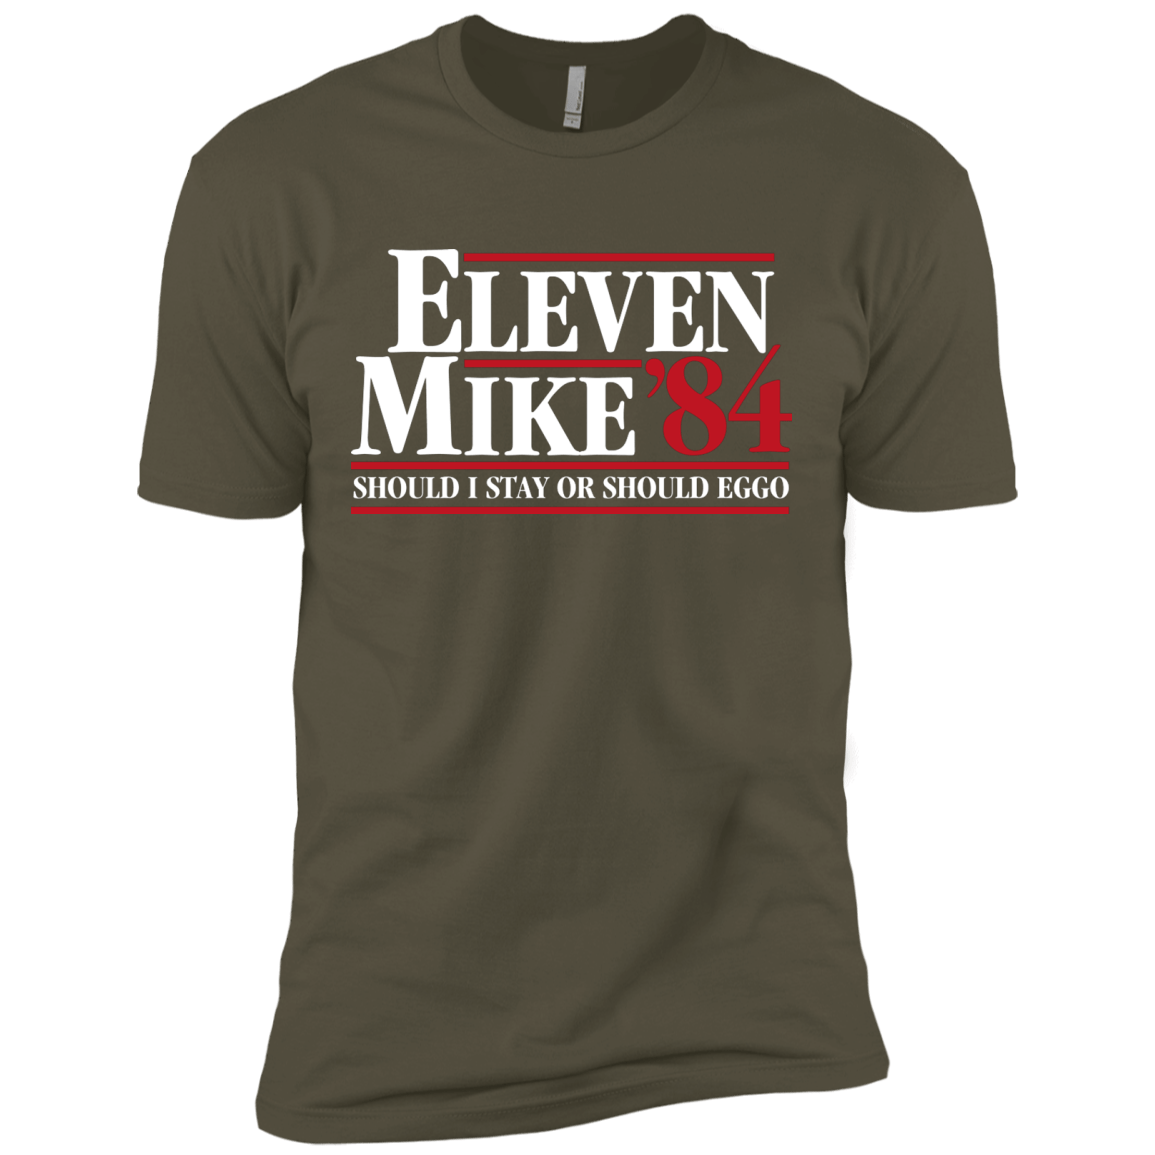 T-Shirts Military Green / X-Small Eleven Mike 84 - Should I Stay or Should Eggo Men's Premium T-Shirt